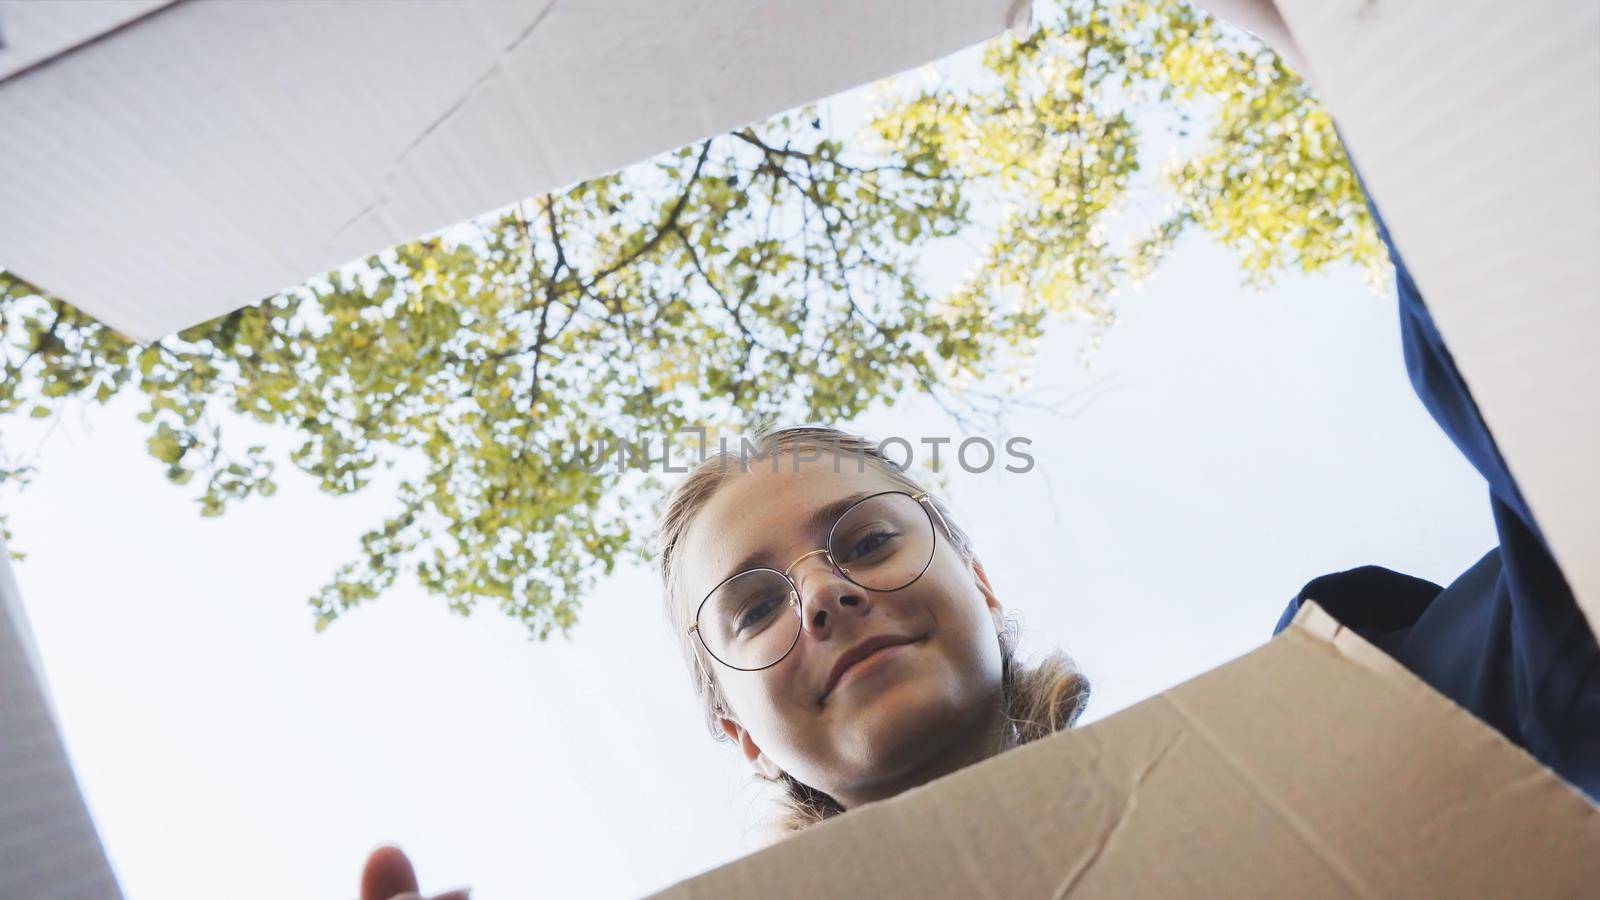 A girl opens a box in the park in admiration